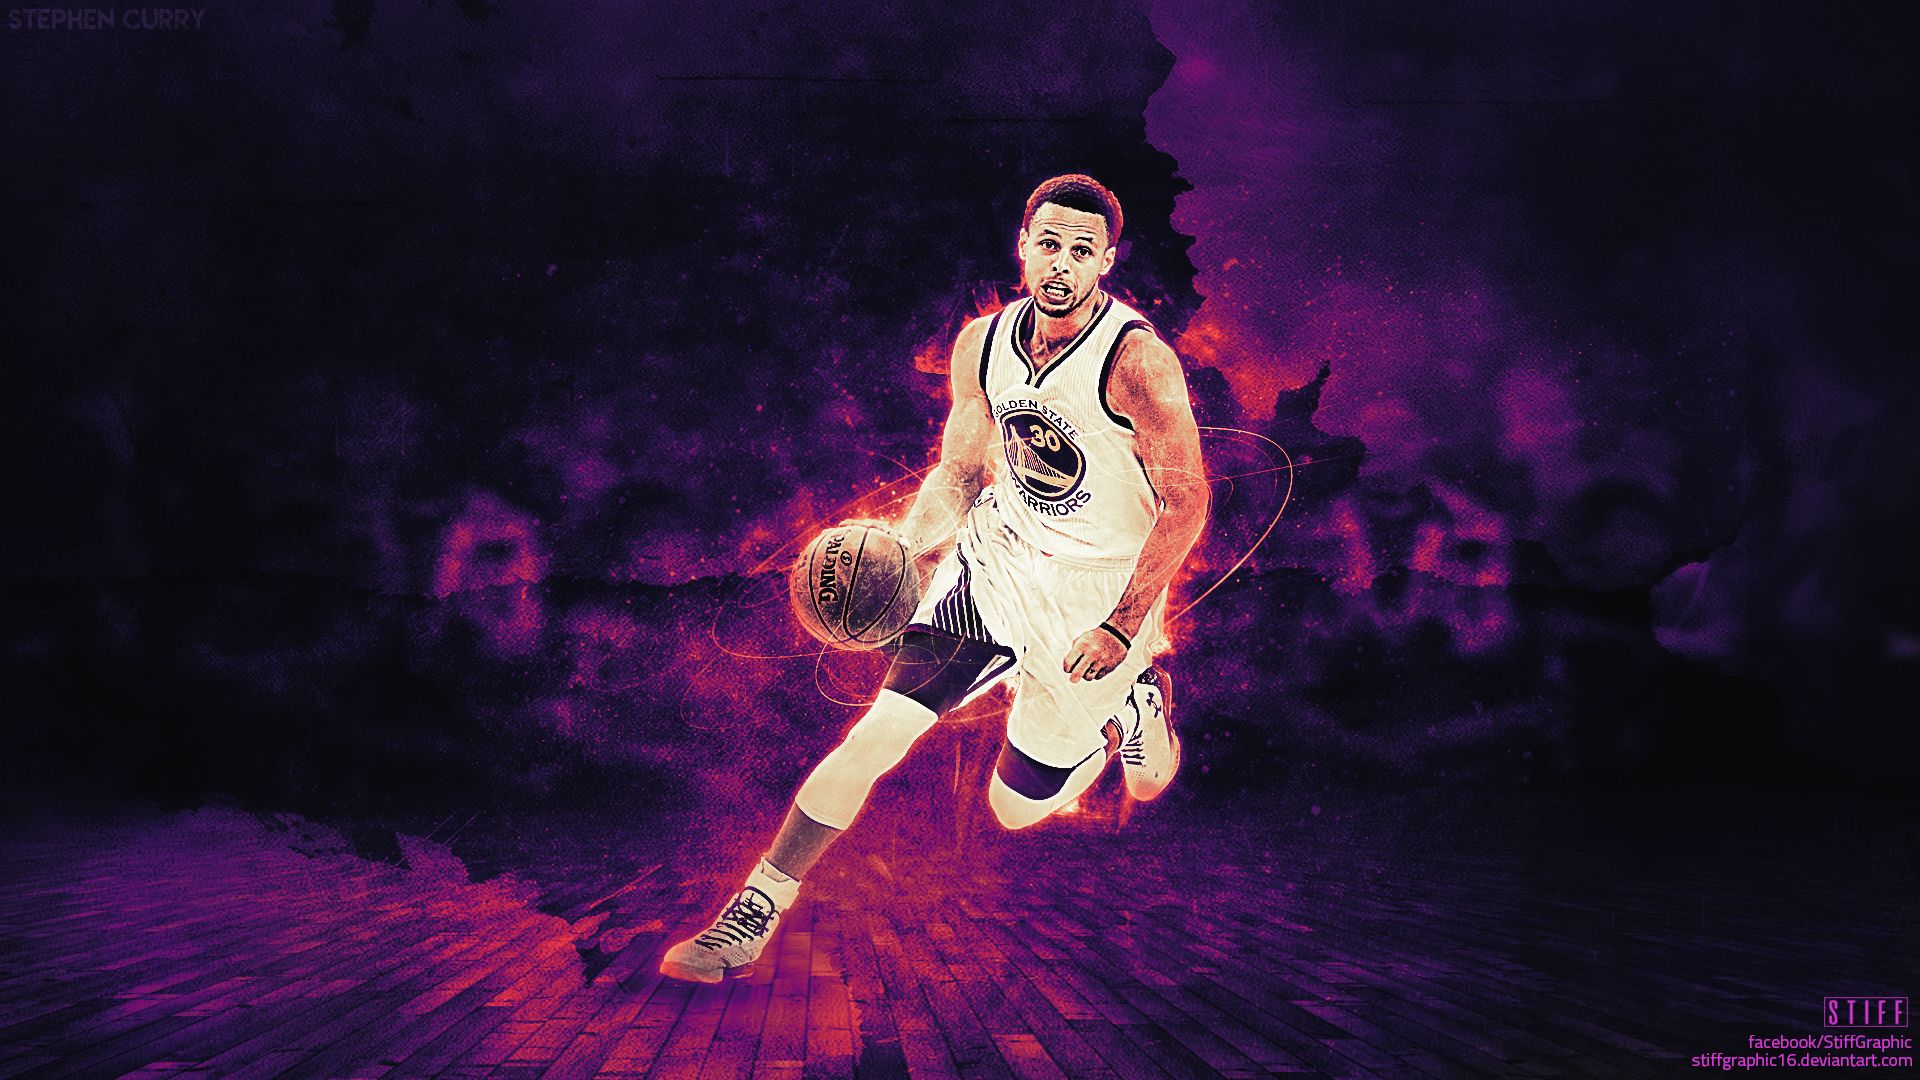 Download wallpapers 4k, Stephen Curry, basketball stars, NBA, Cleveland  Cavaliers